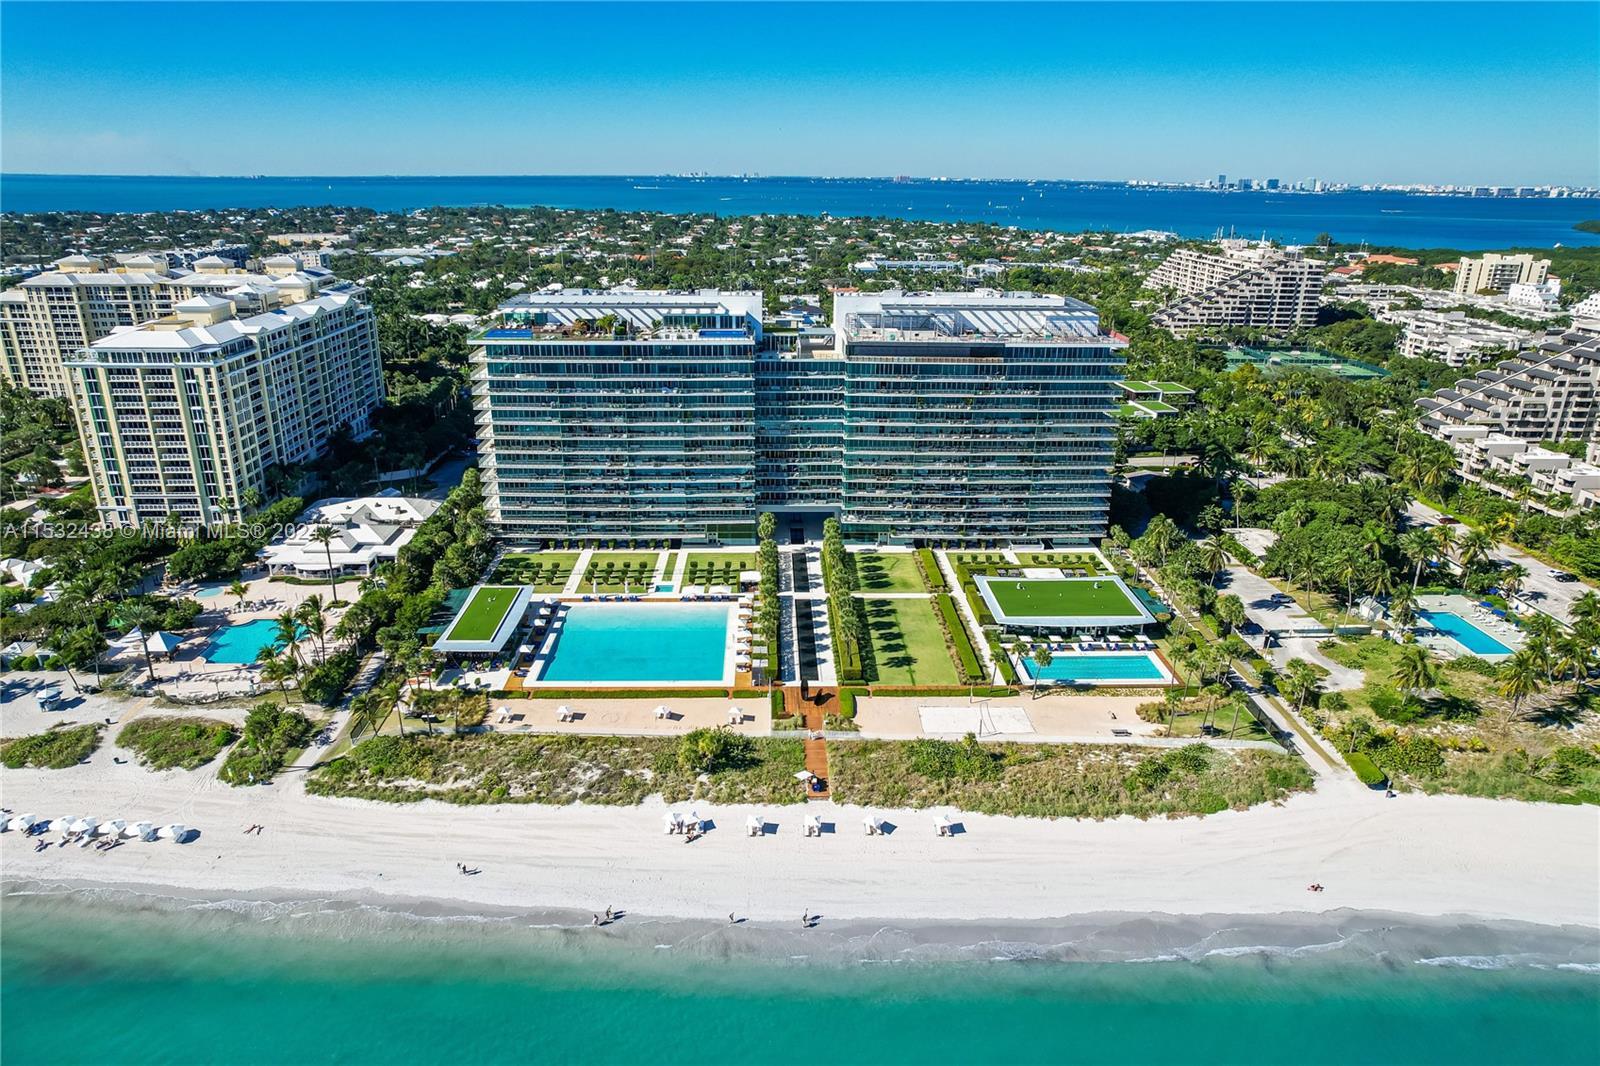 Welcome to your dream home at Oceana Key Biscayne, a mesmerizing seaside escape that defines unparal